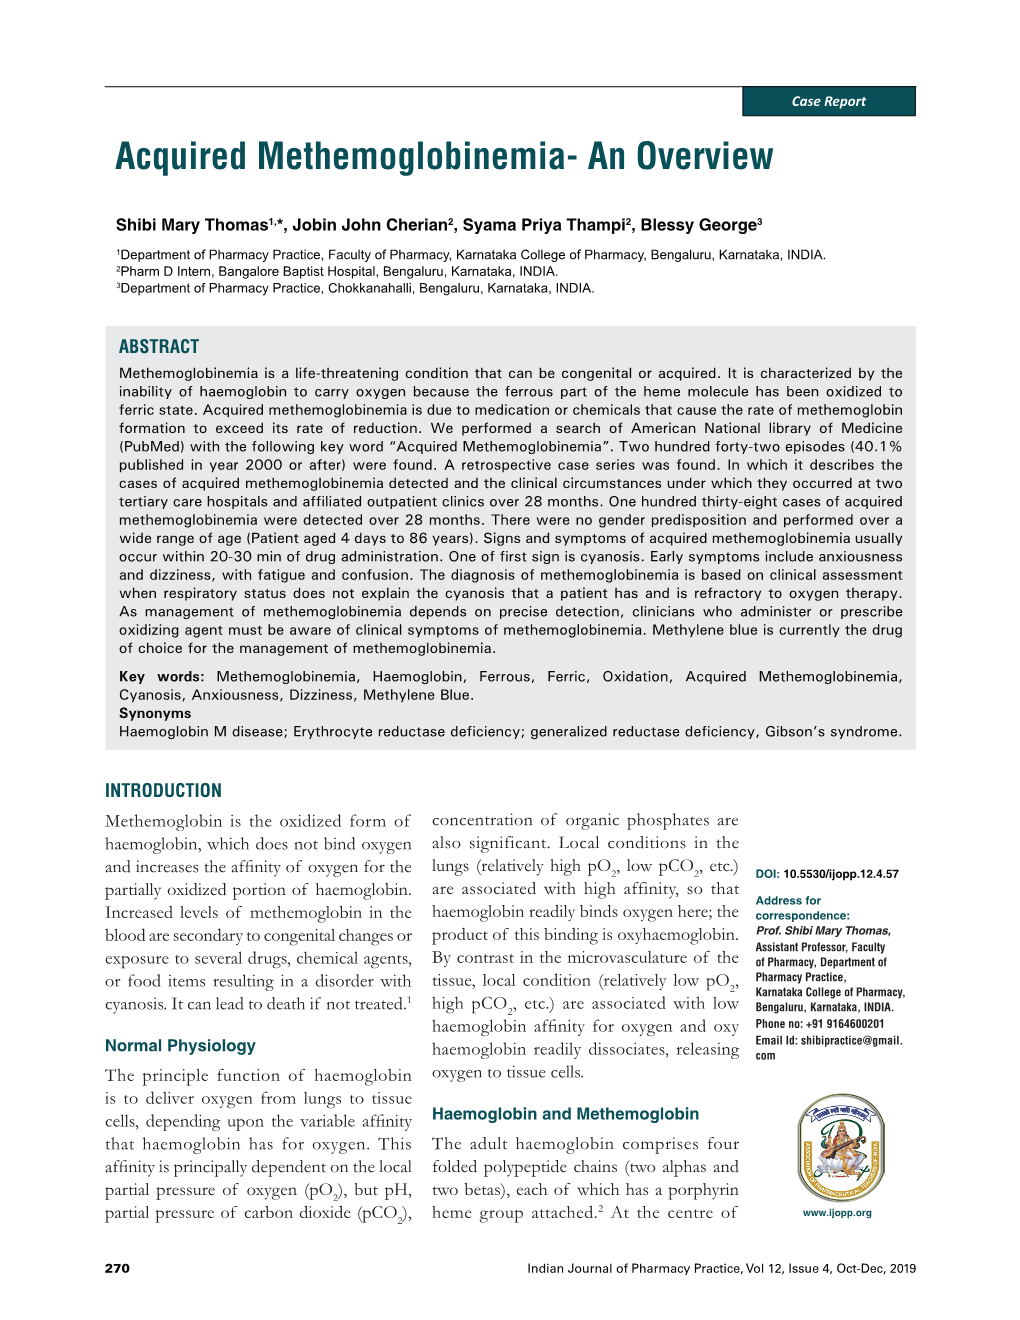 Acquired Methemoglobinemia- an Overview